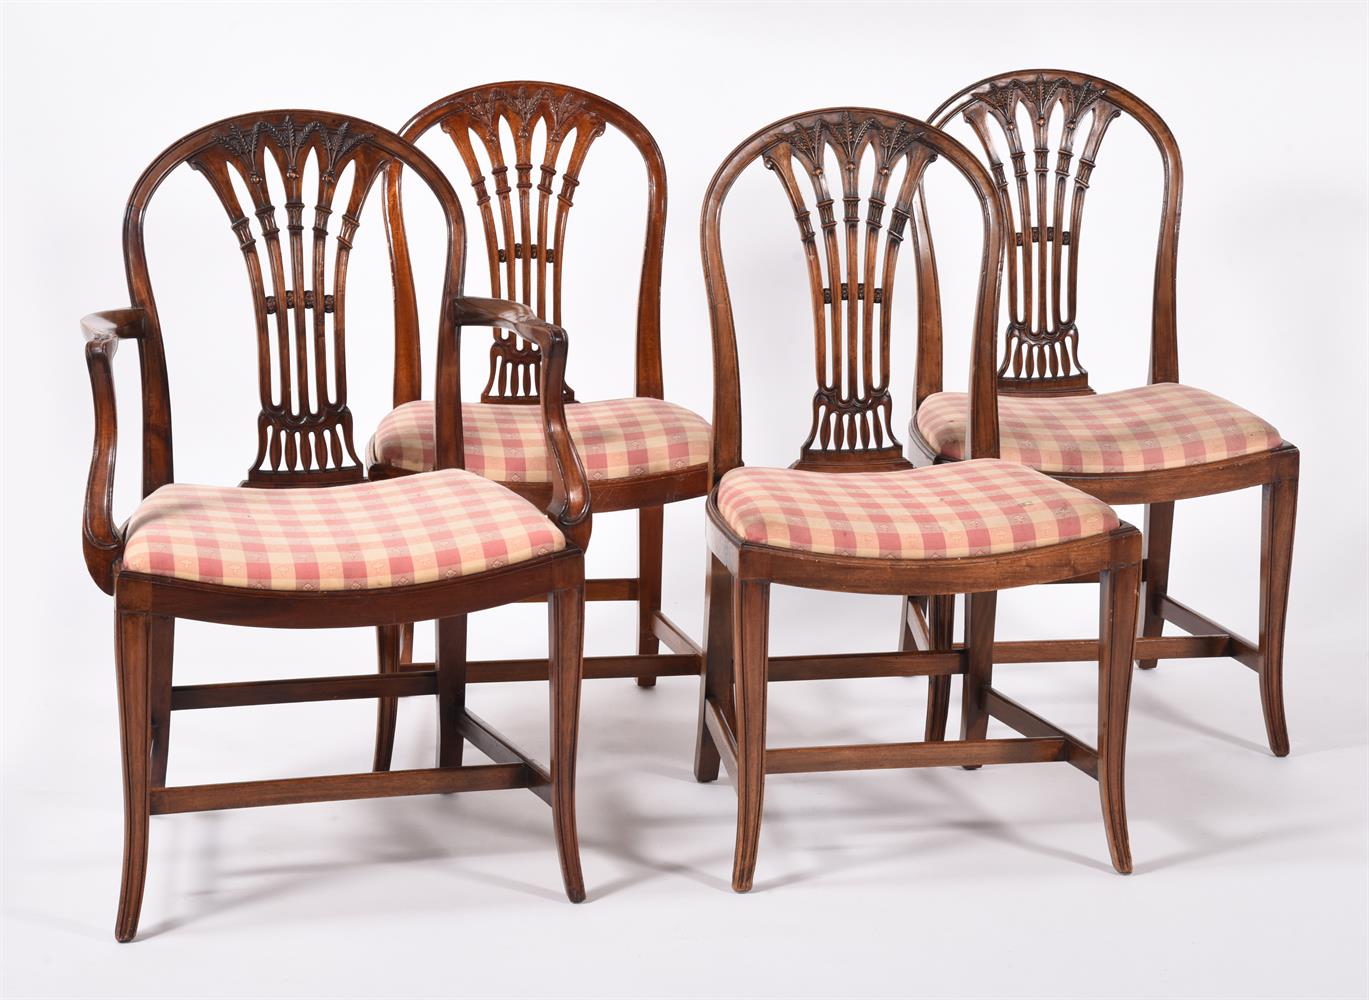 A HARLEQUIN SET OF TEN MAHOGANY DINING CHAIRS IN GEORGE III STYLE - Image 2 of 4